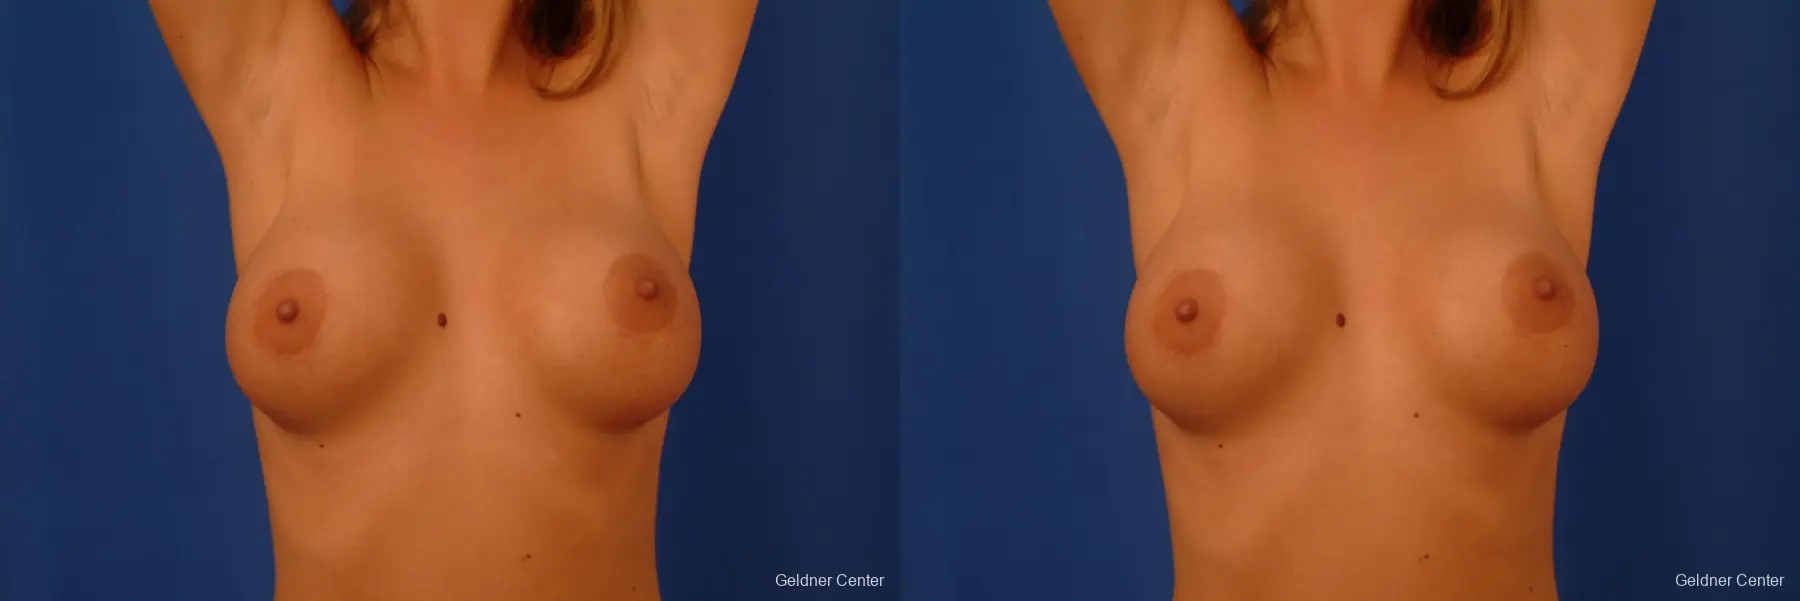 Breast Augmentation Lake Shore Dr, Chicago 2533 - Before and After 5